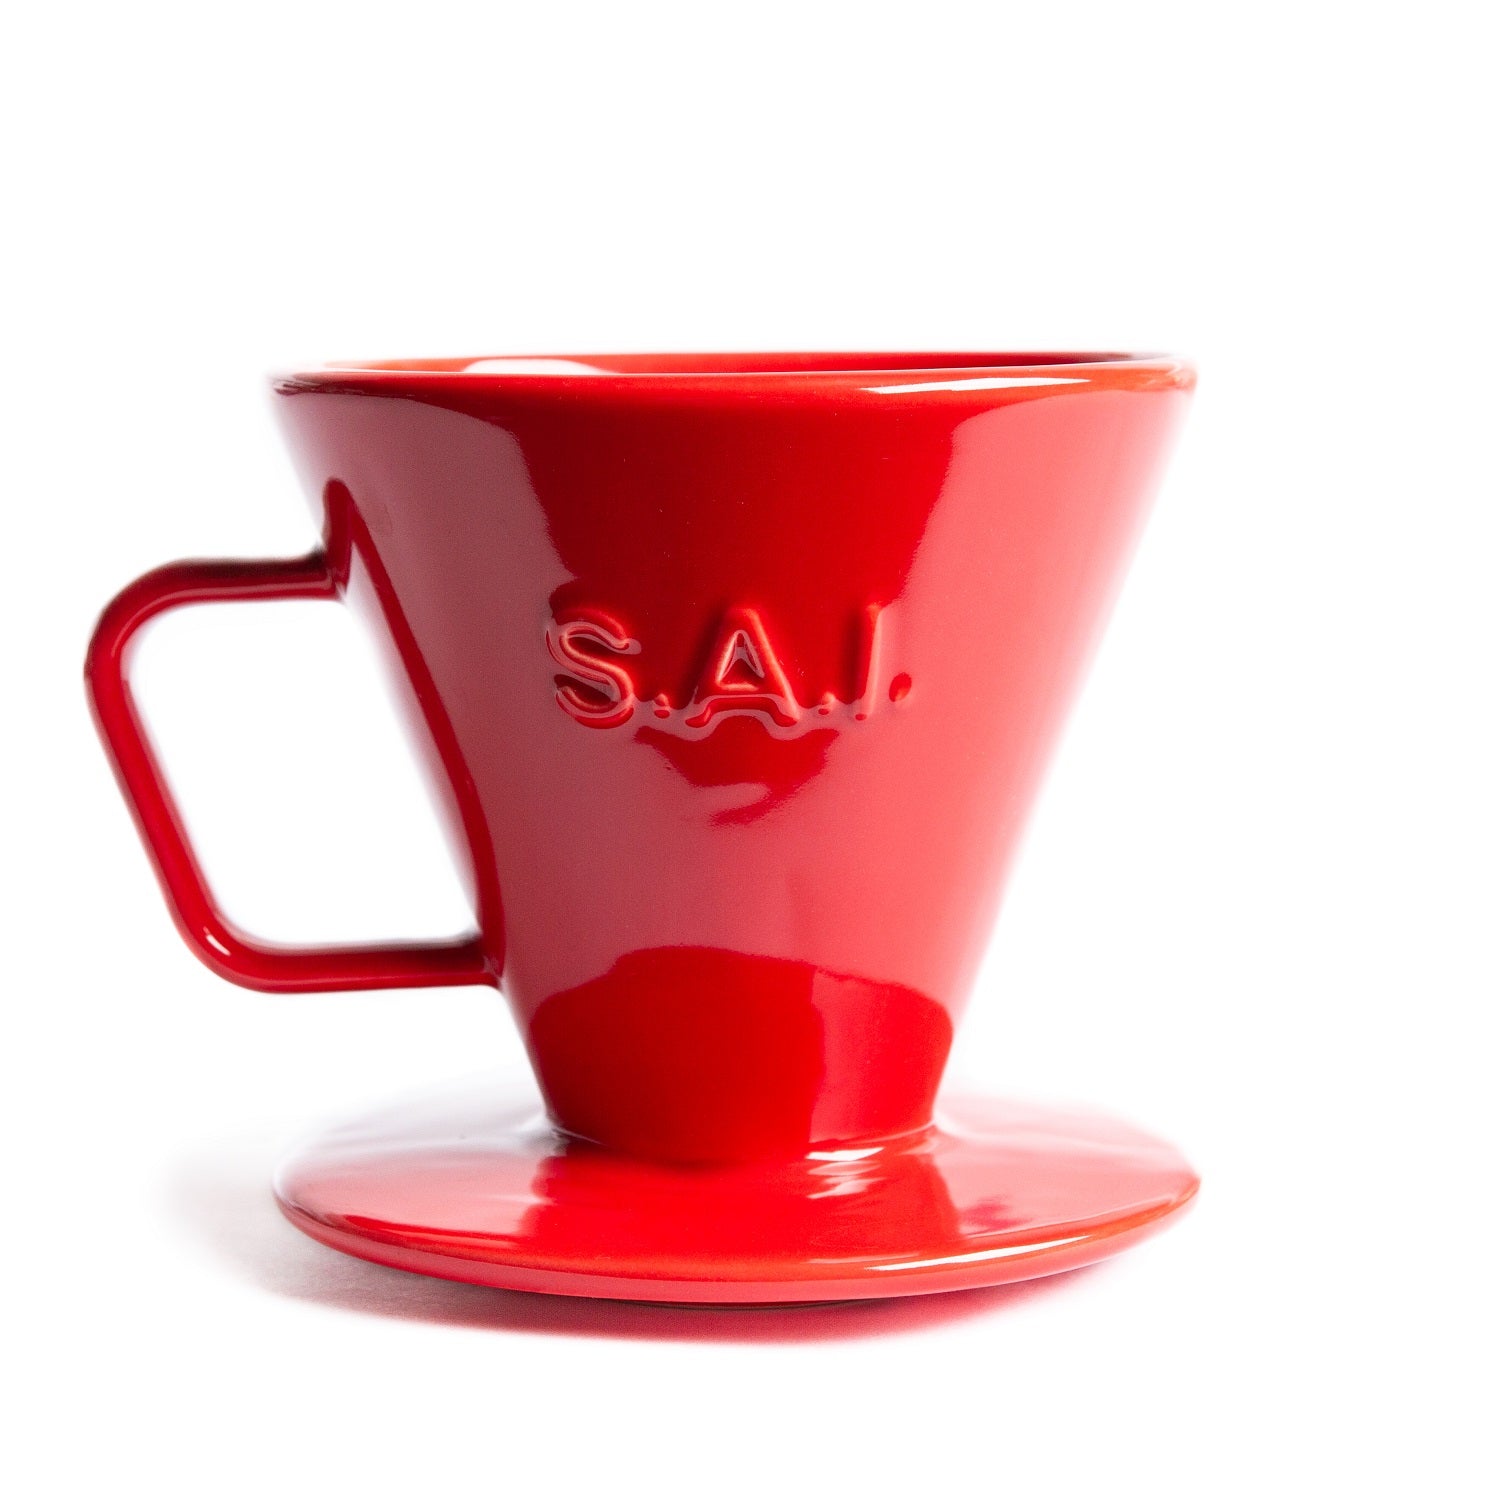 C70 Ceramic Pourover Brewer - Saint Anthony Industries